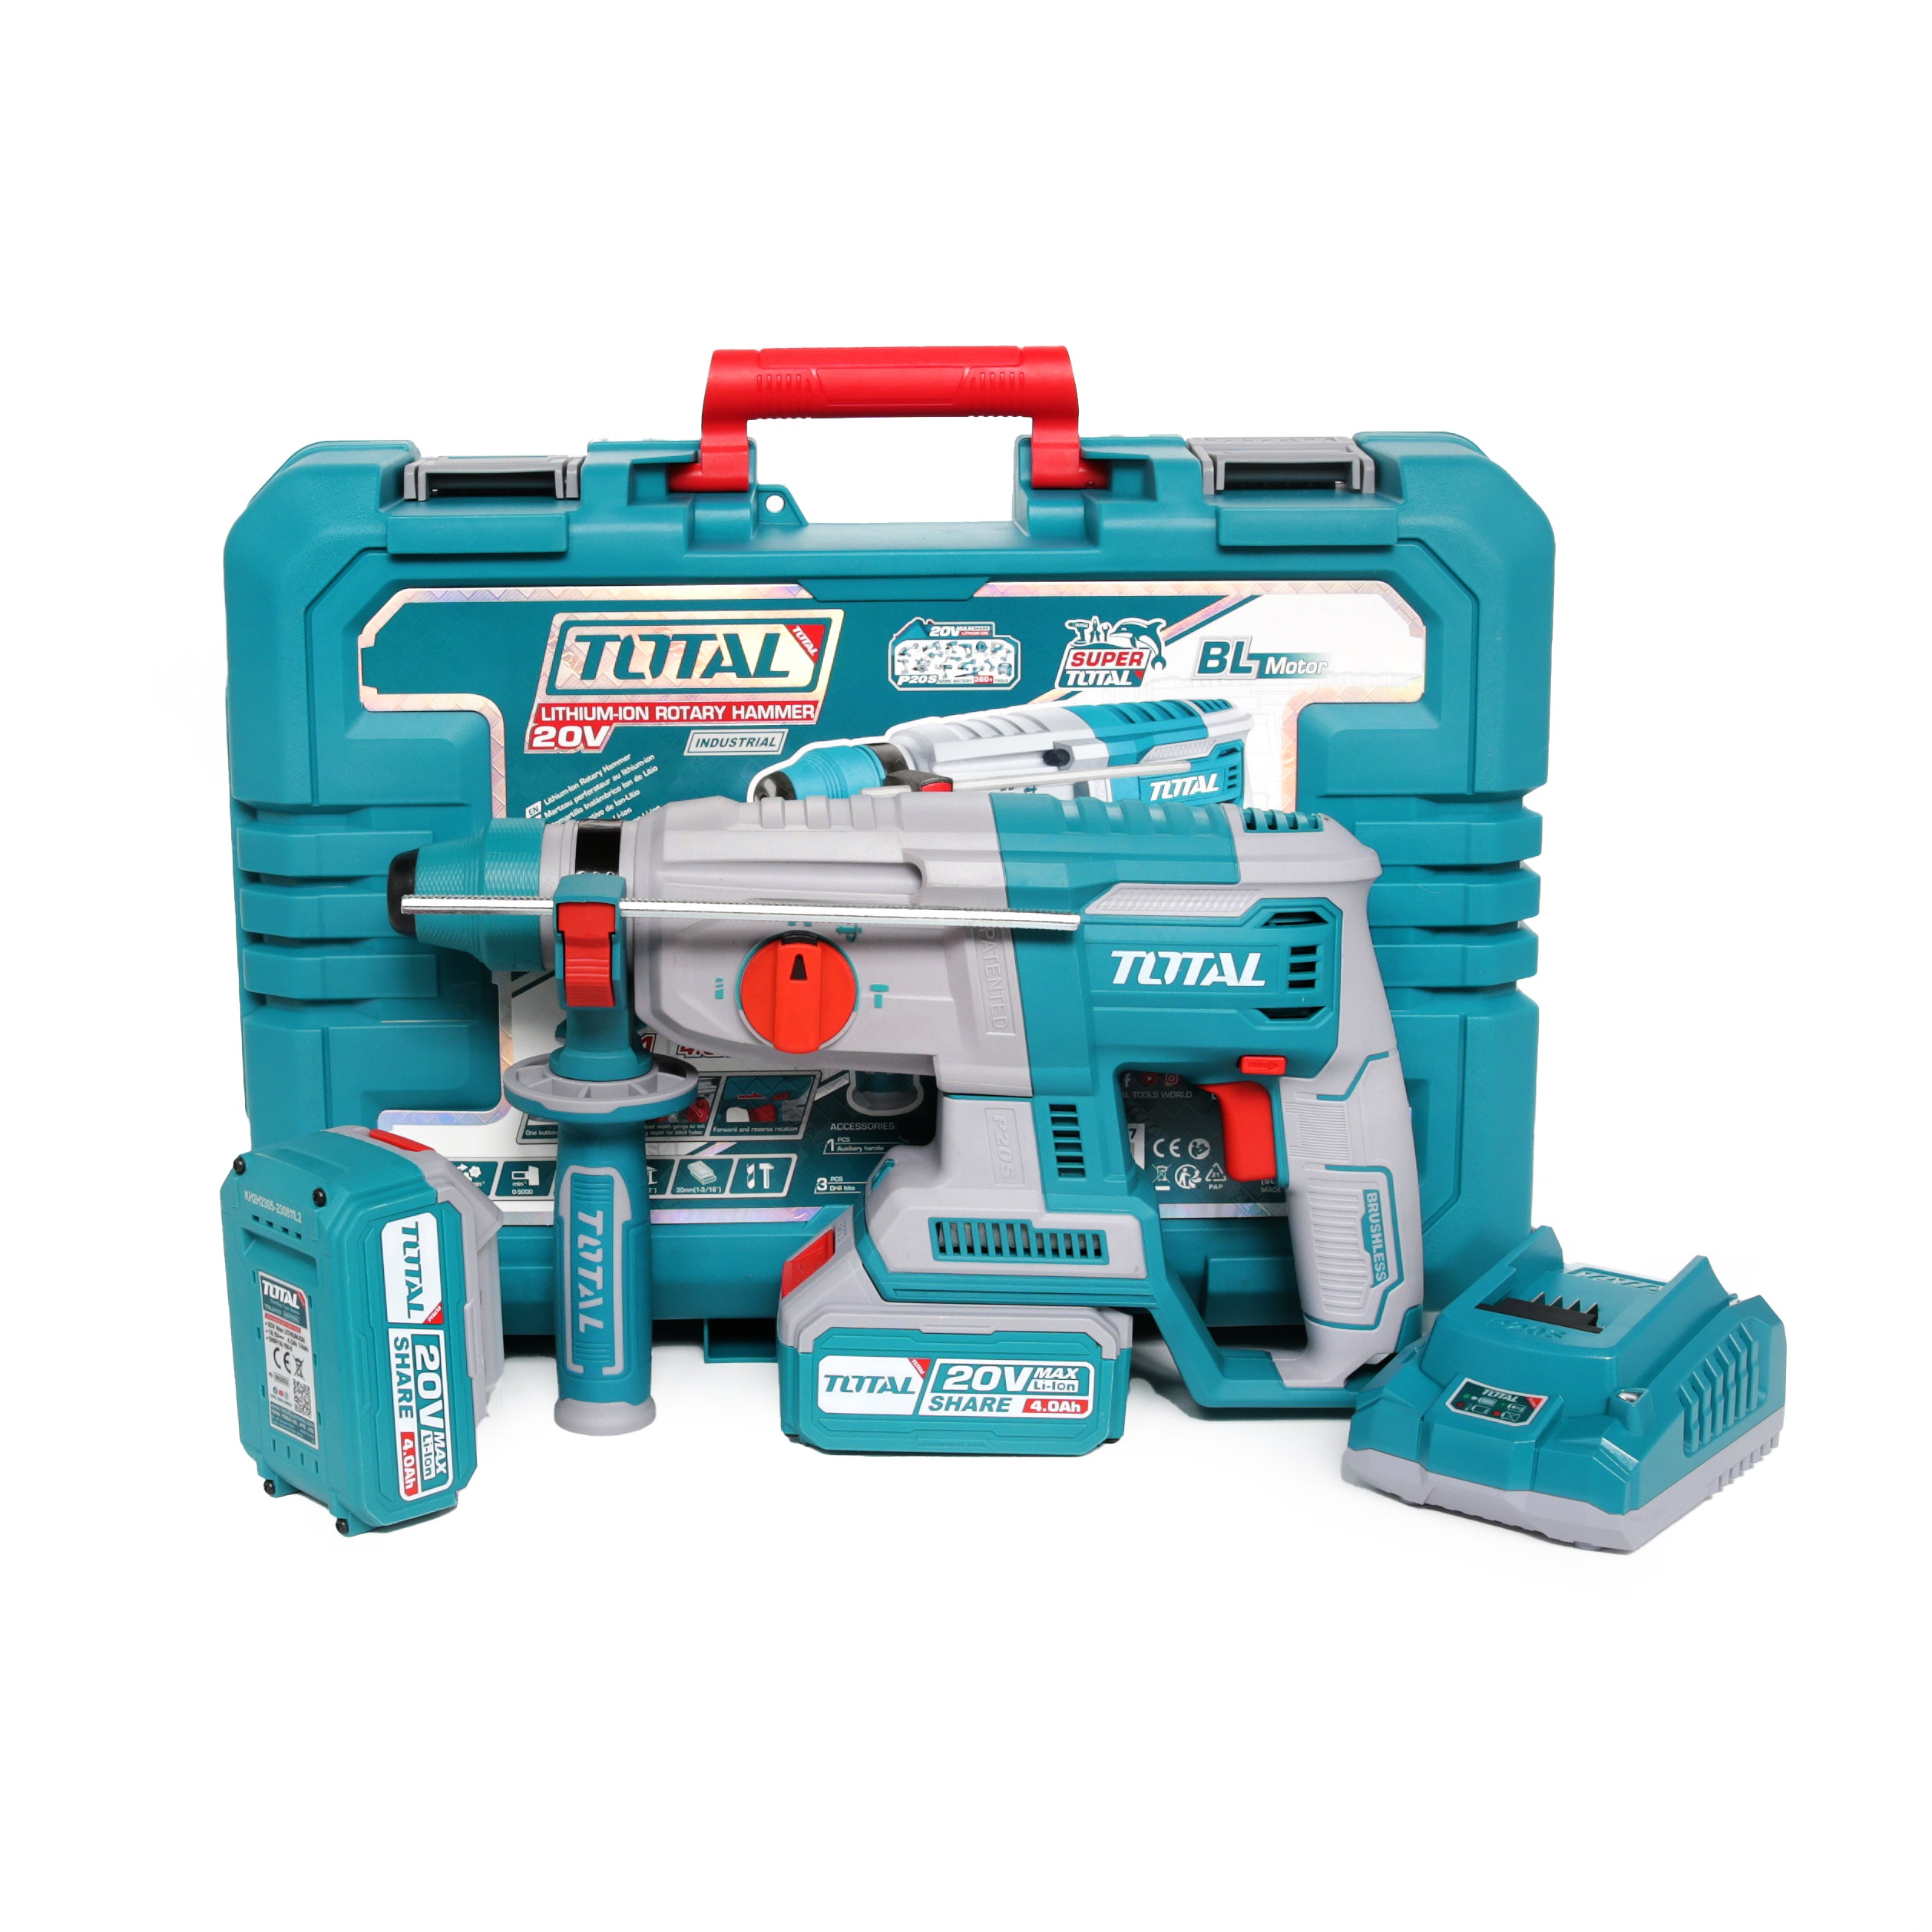 Total Li-Ion 20V Rotary Hammer (with 2 x Batteries & Charger) - TRHLI202287